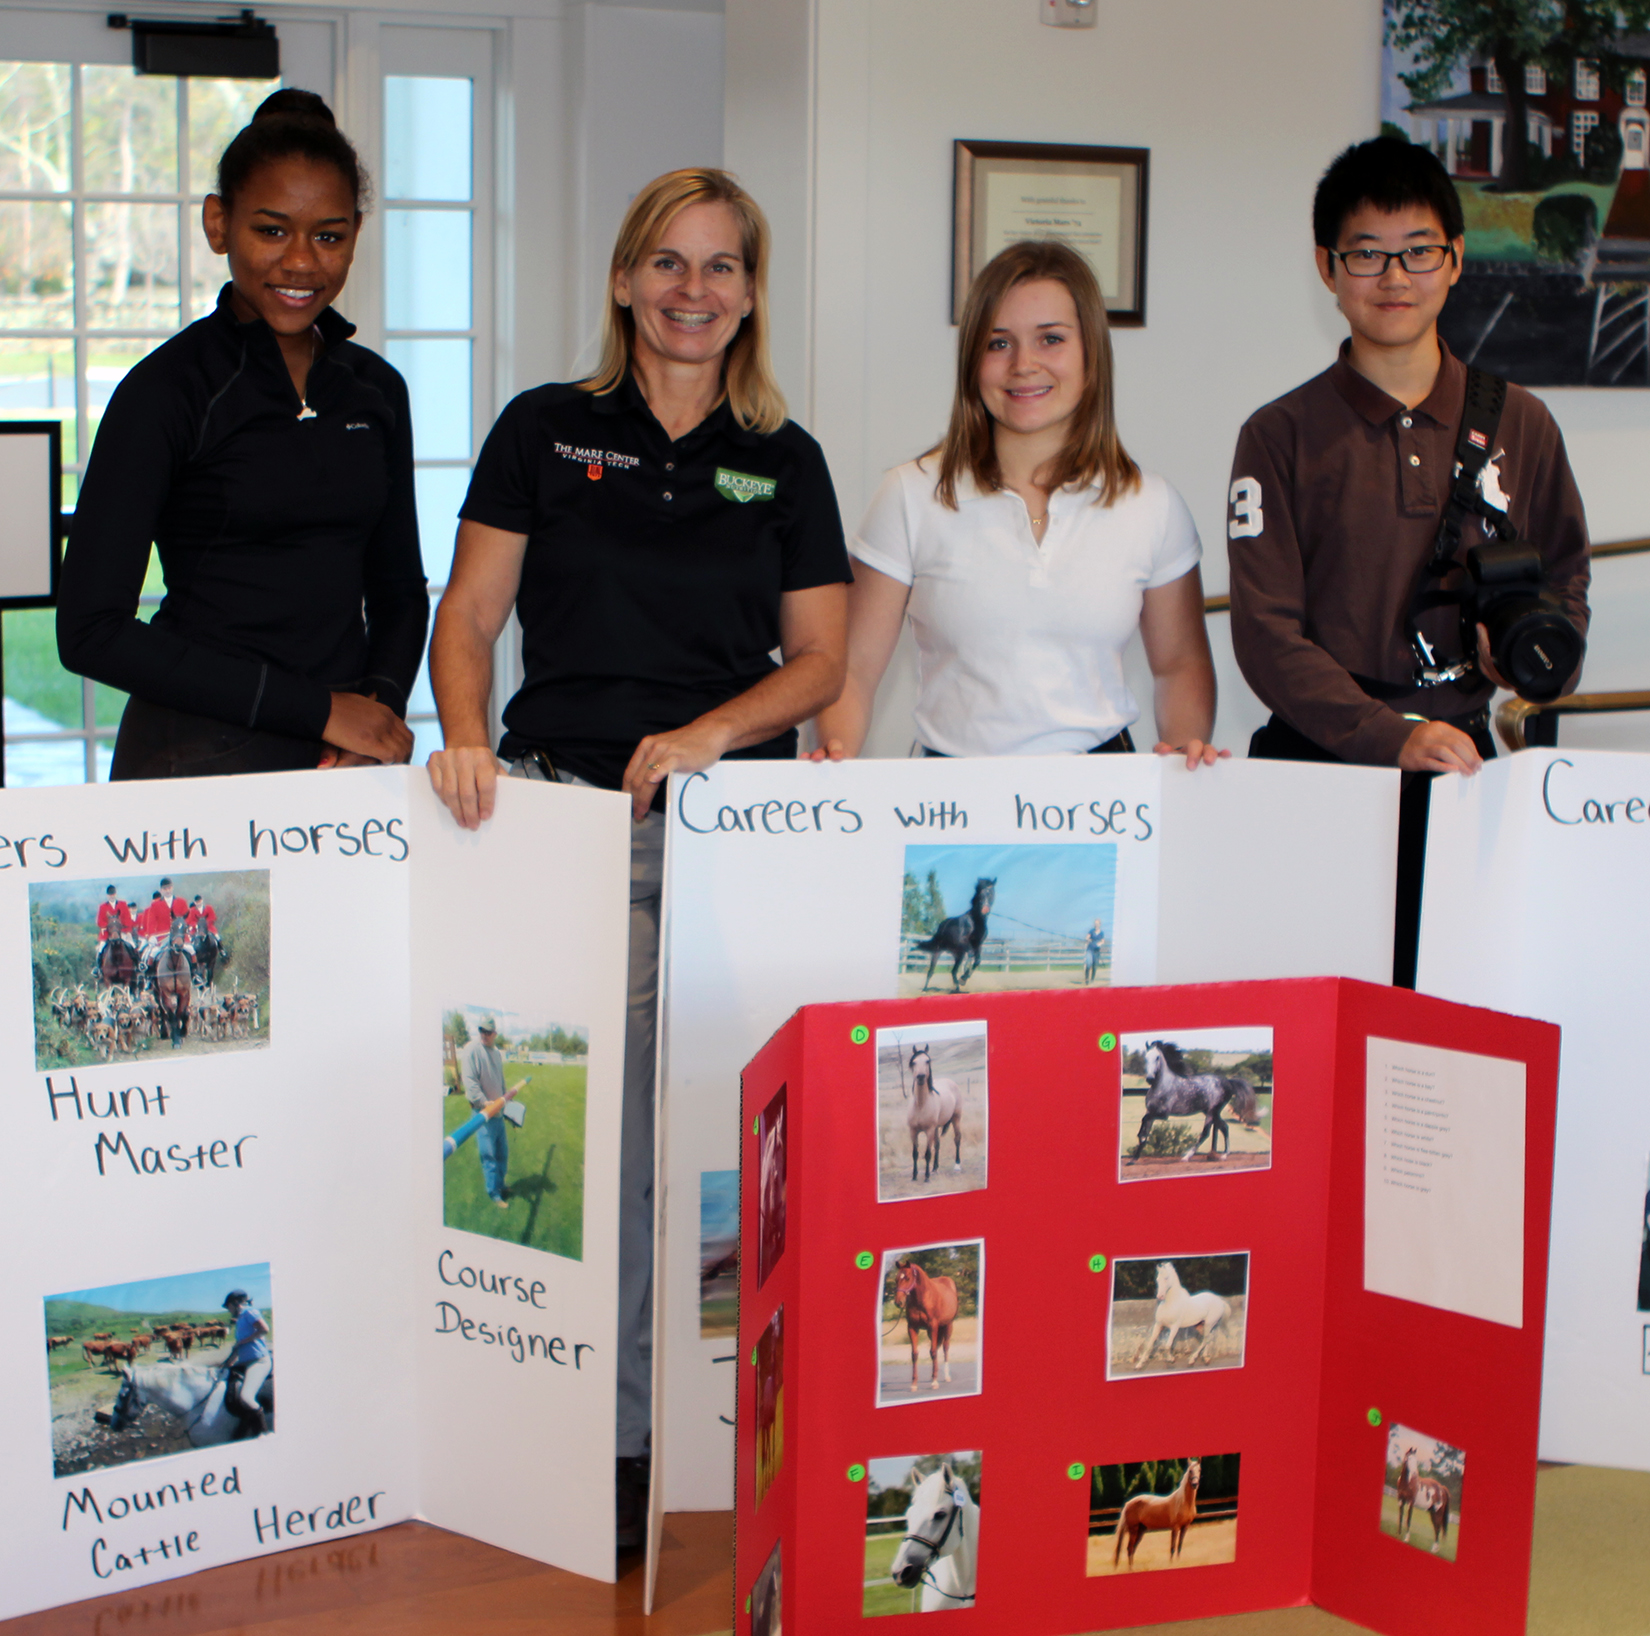 In addition to the research internships, Foxcroft students (from left) Carsyn Betz, Alex Van der Water, and Grace Chen are working with Virginia State Youth Equine Extension Program Associate Sandy Ar